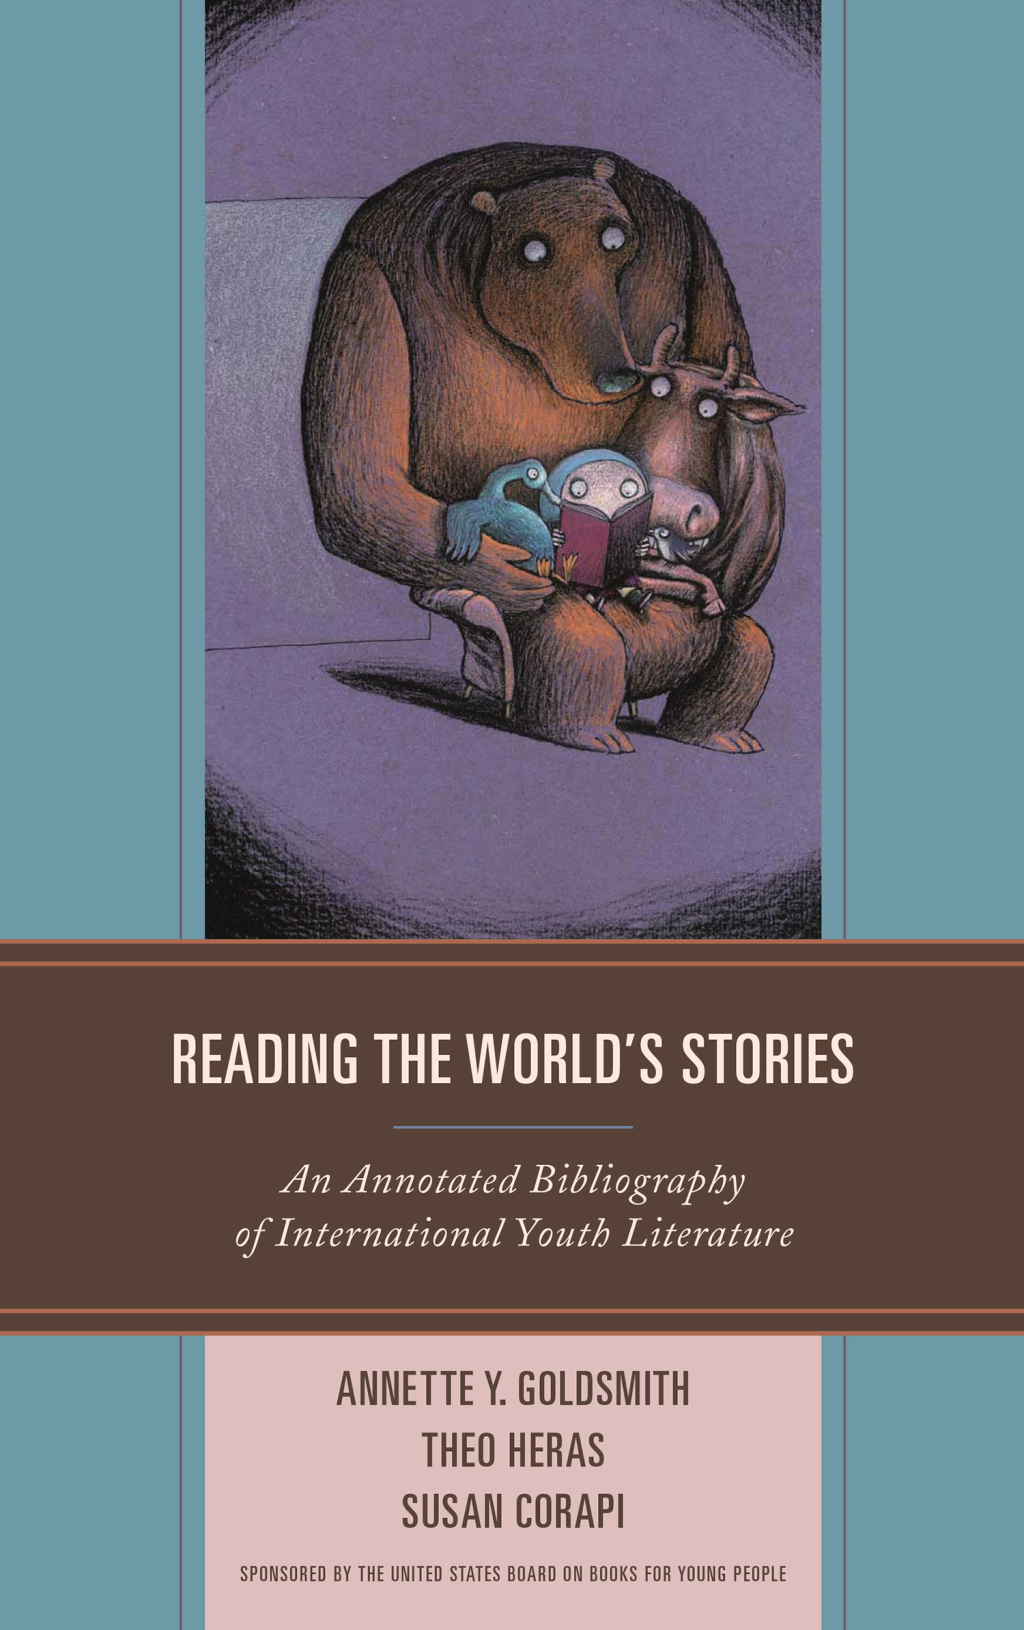 Reading the World's Stories (eBook) - Annette Y. Goldsmith; Theo Heras; Susan Corapi